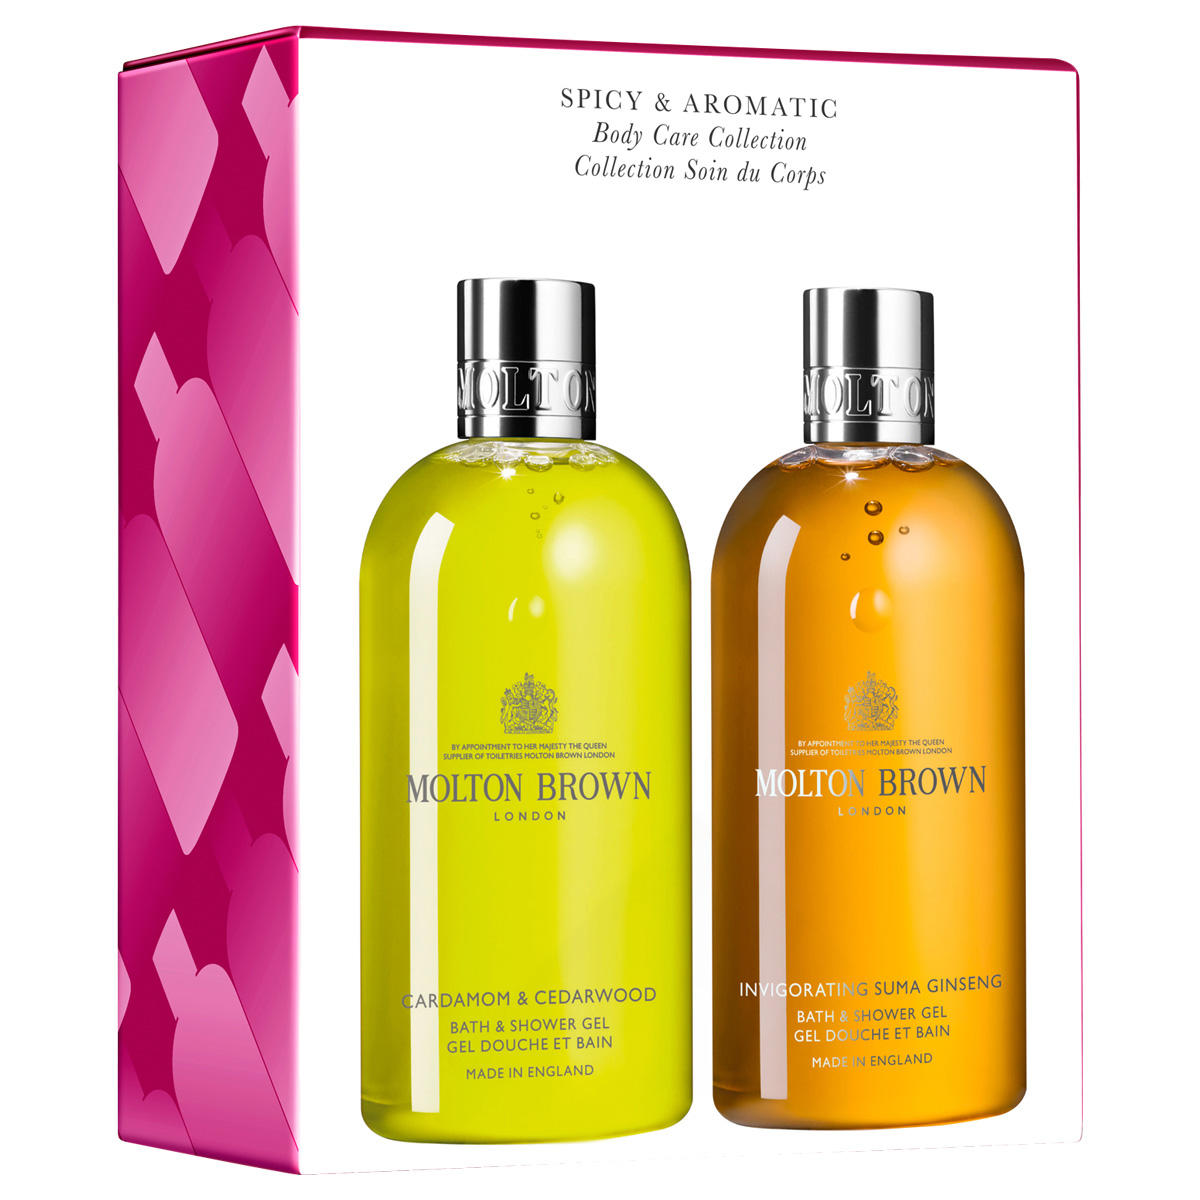 MOLTON BROWN Spicy & Aromatic Body Care Collection 2 x 300 ml  - 1